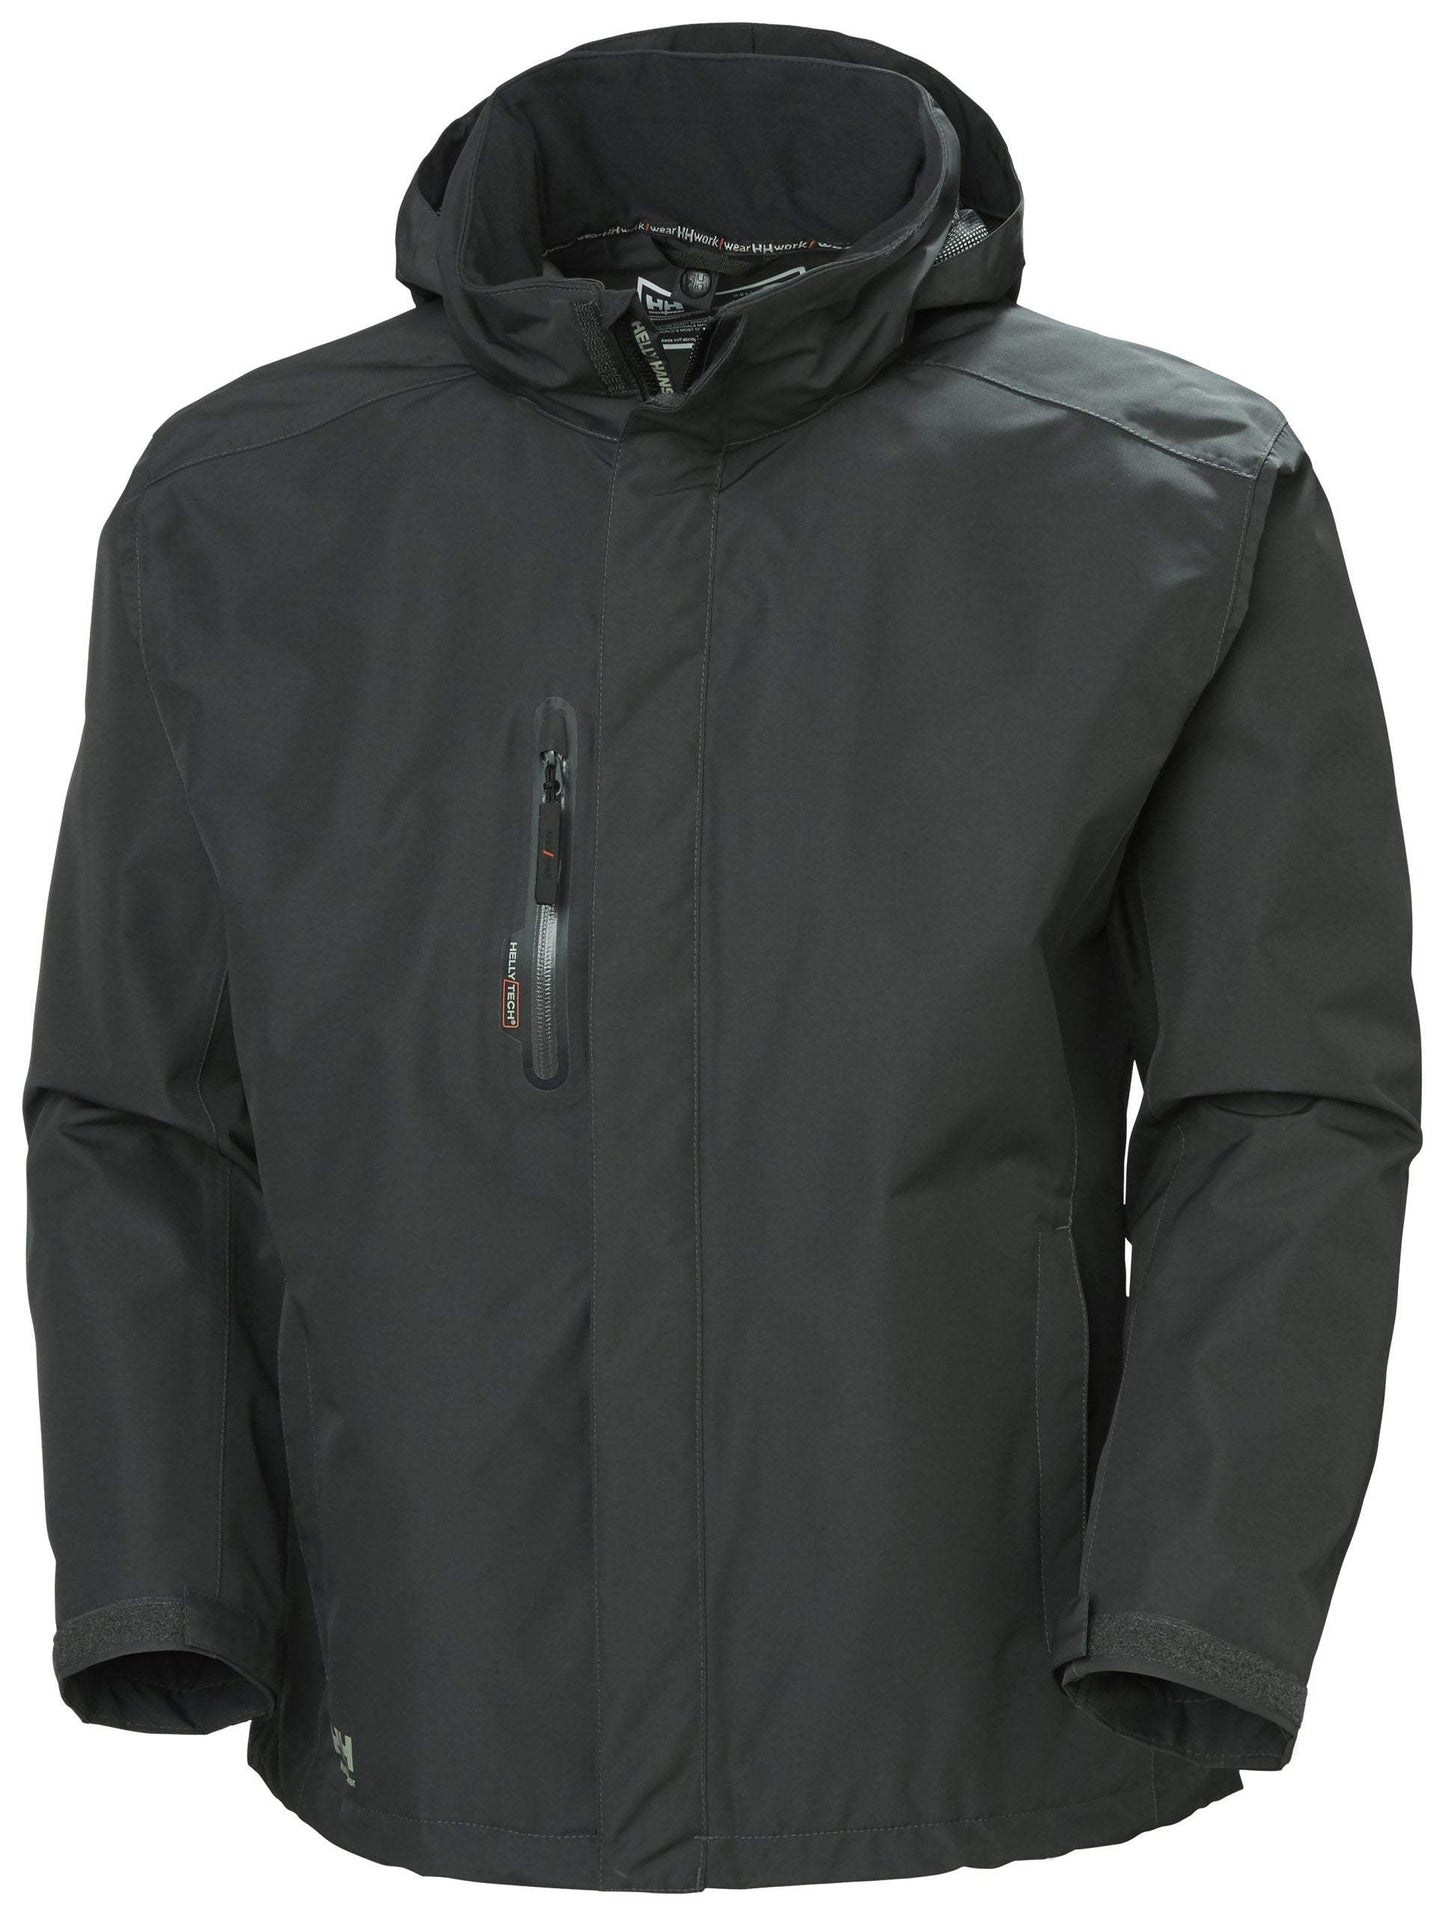 Helly Hansen Men's Manchester Shell Jacket - The Luxury Promotional Gifts Company Limited